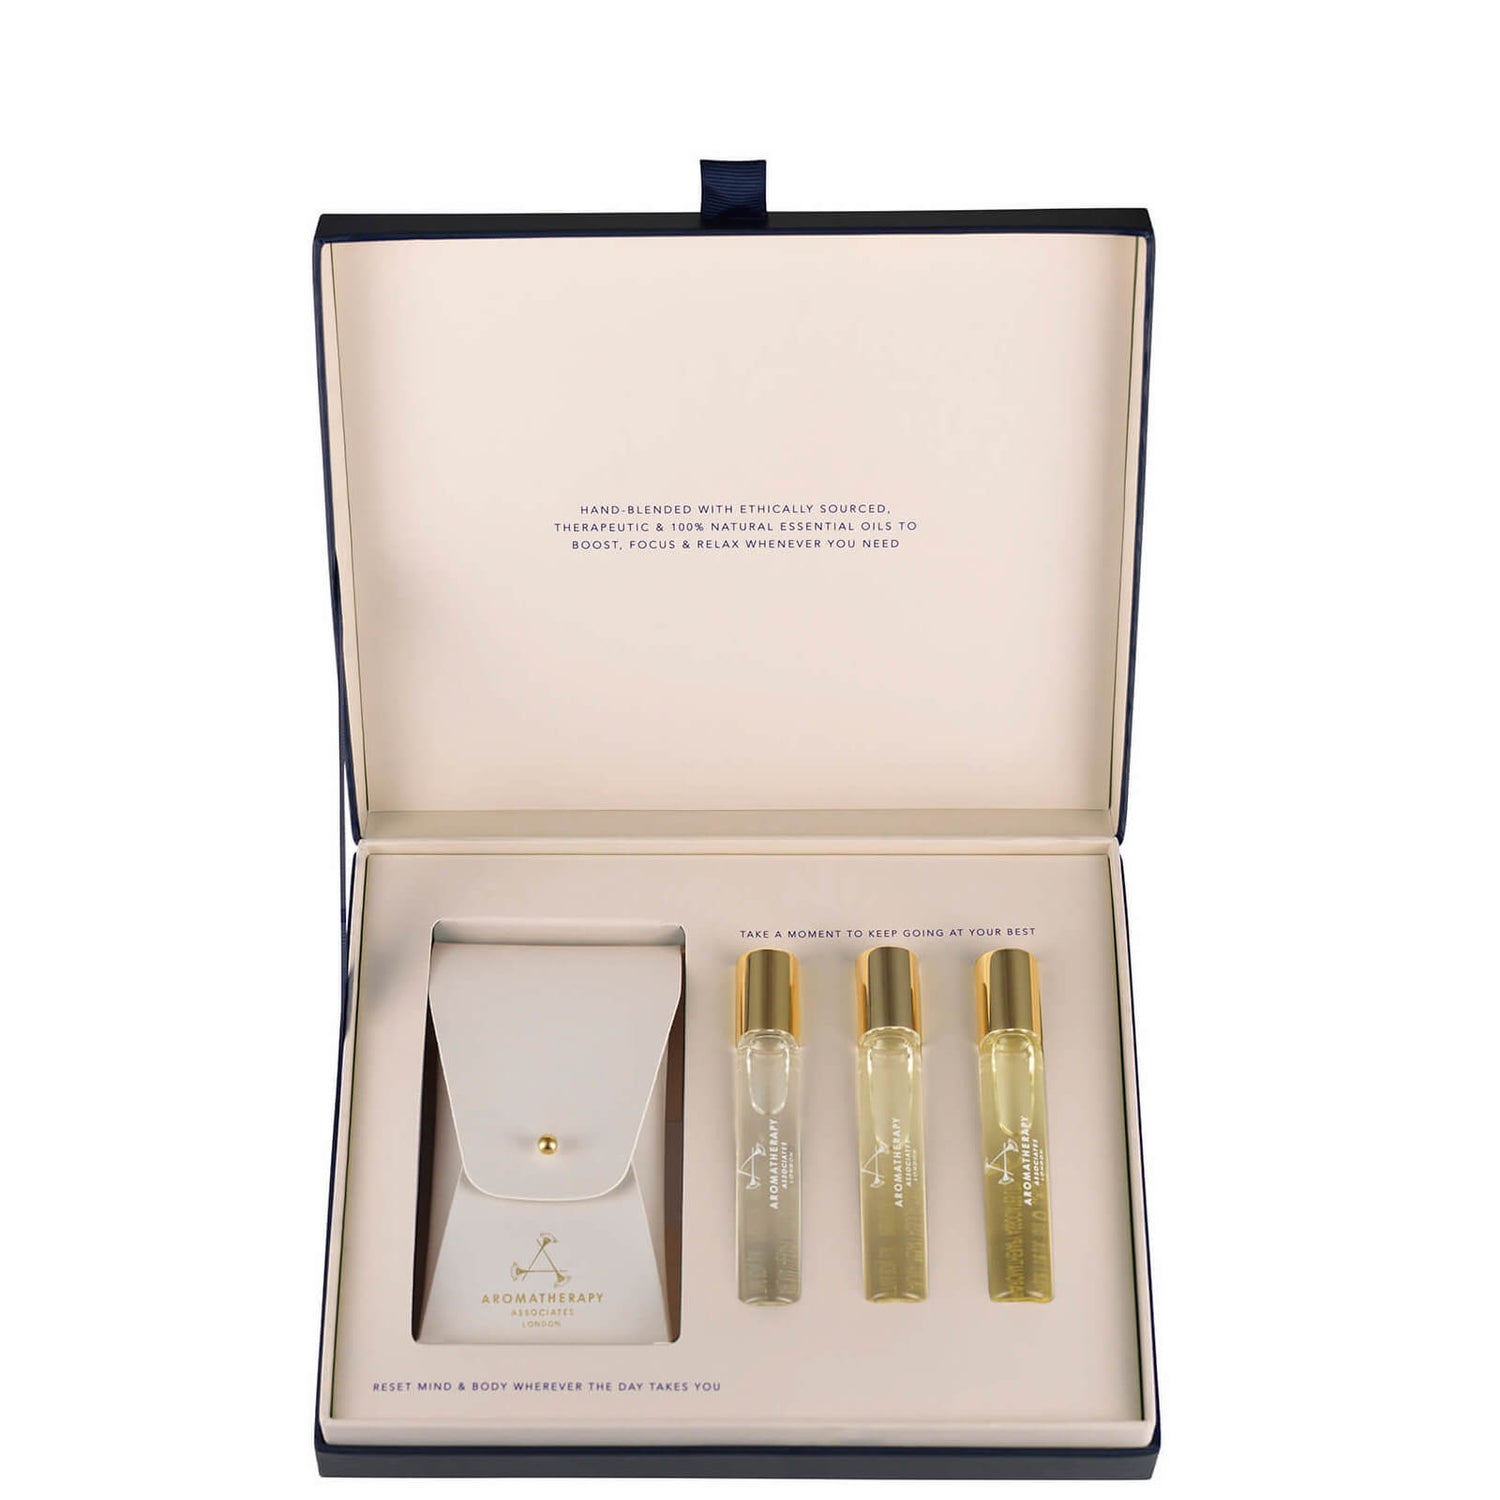 Aromatherapy Associates Exclusive Moments on-the-go Set (Worth £81.00)